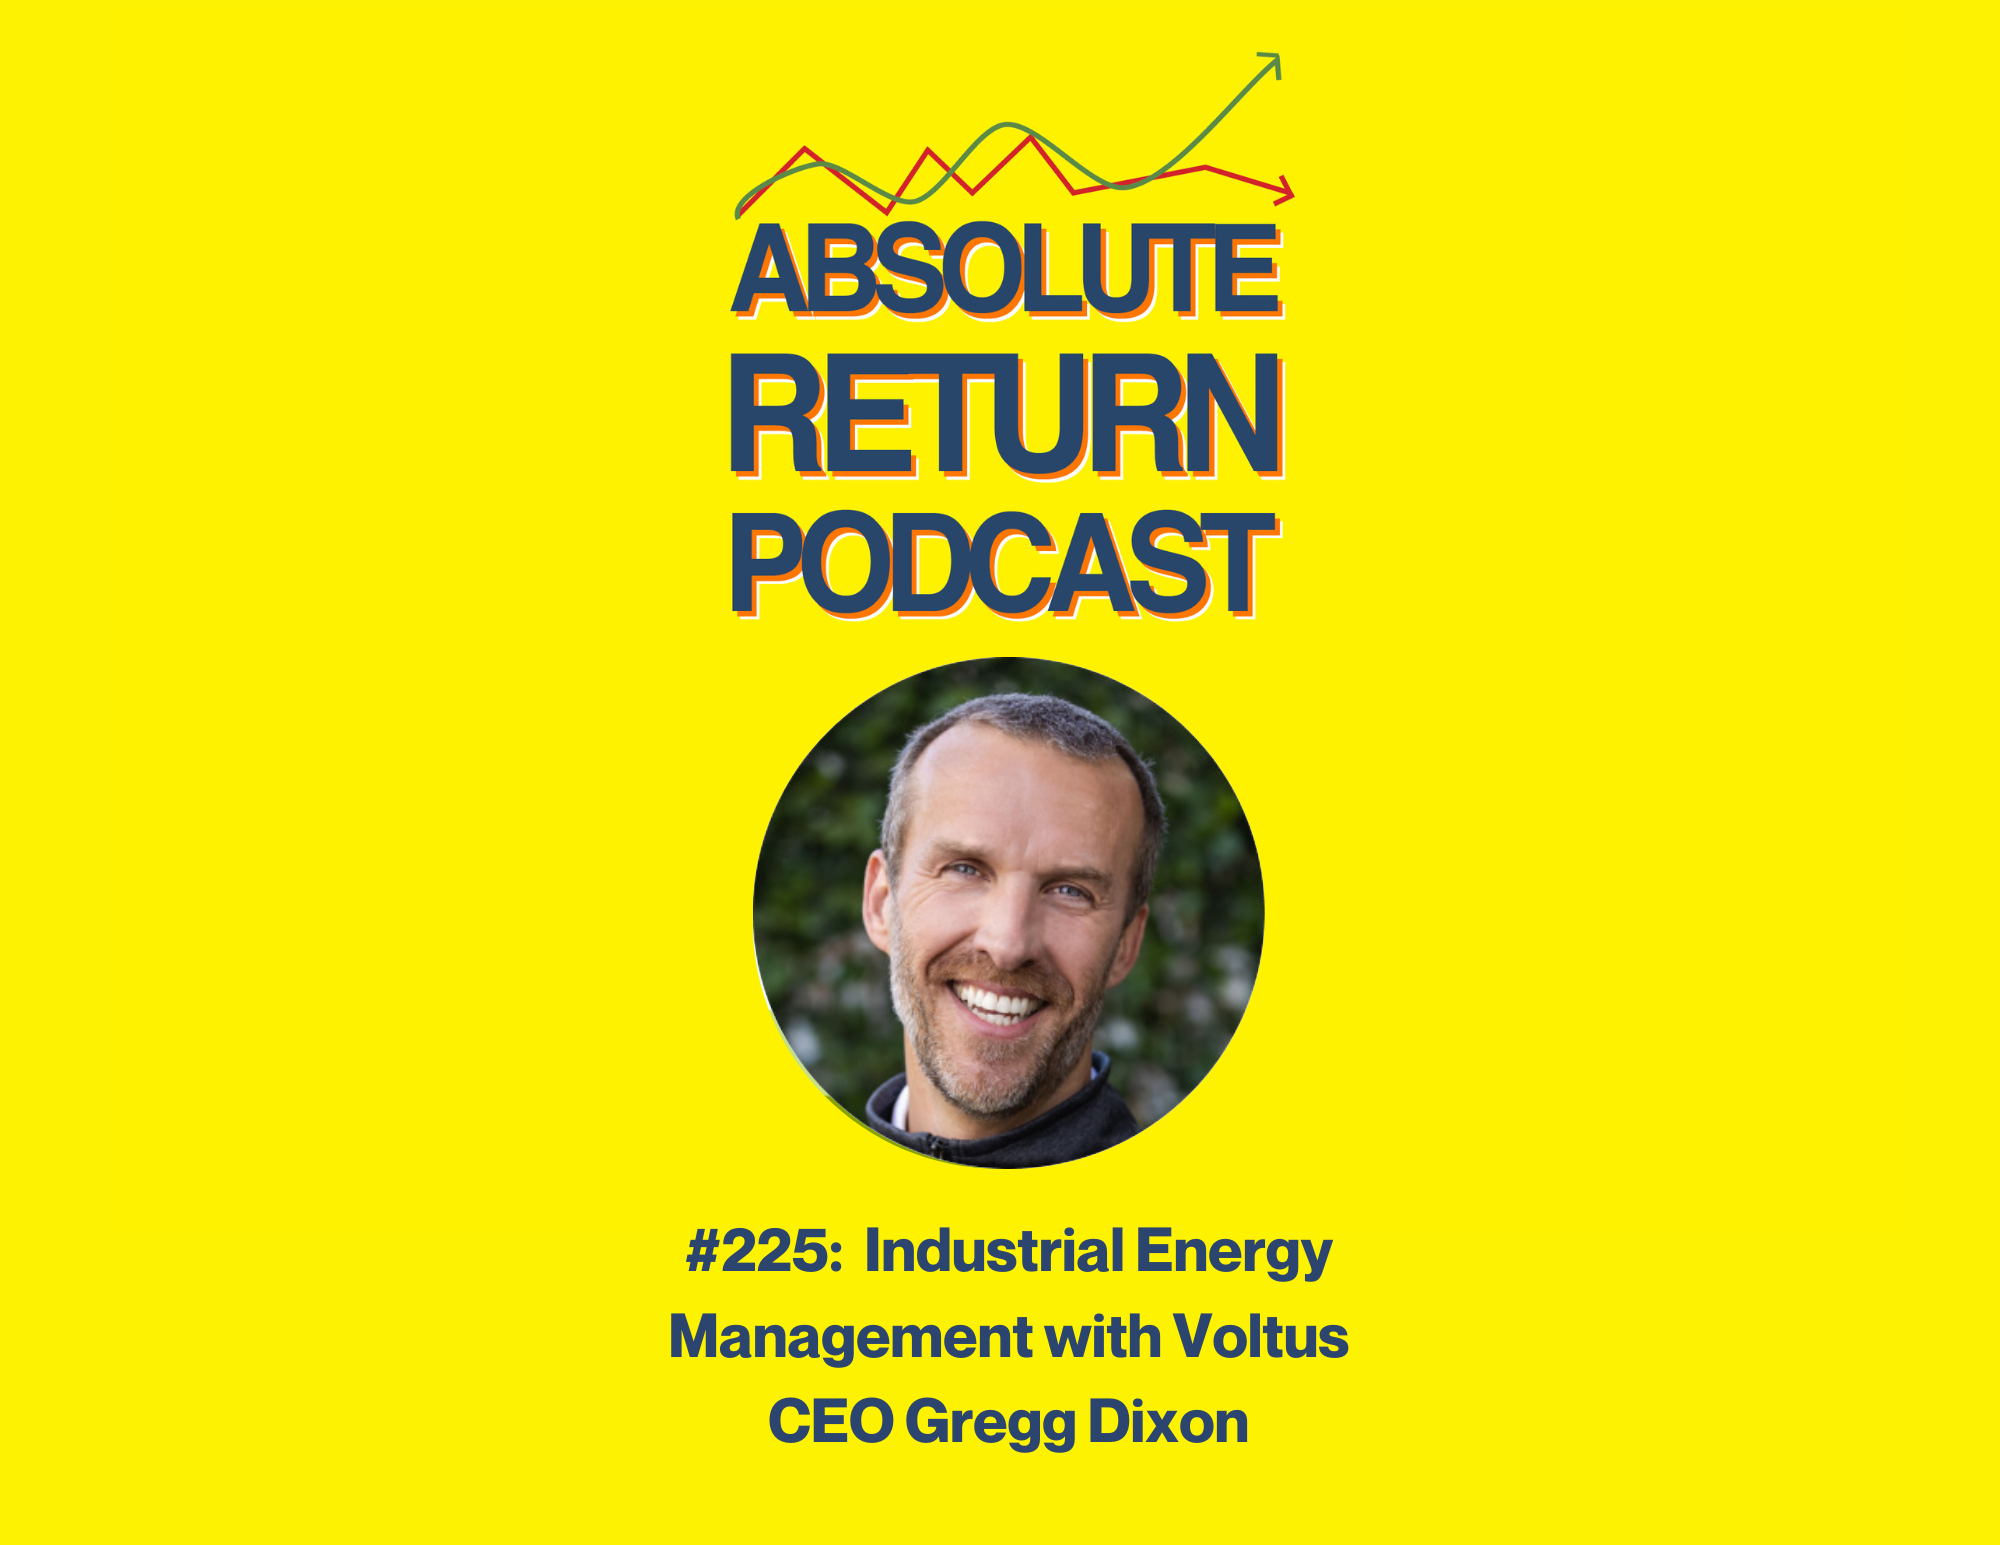 Absolute Return Podcast #225: Industrial Energy Management with Voltus CEO Gregg Dixon